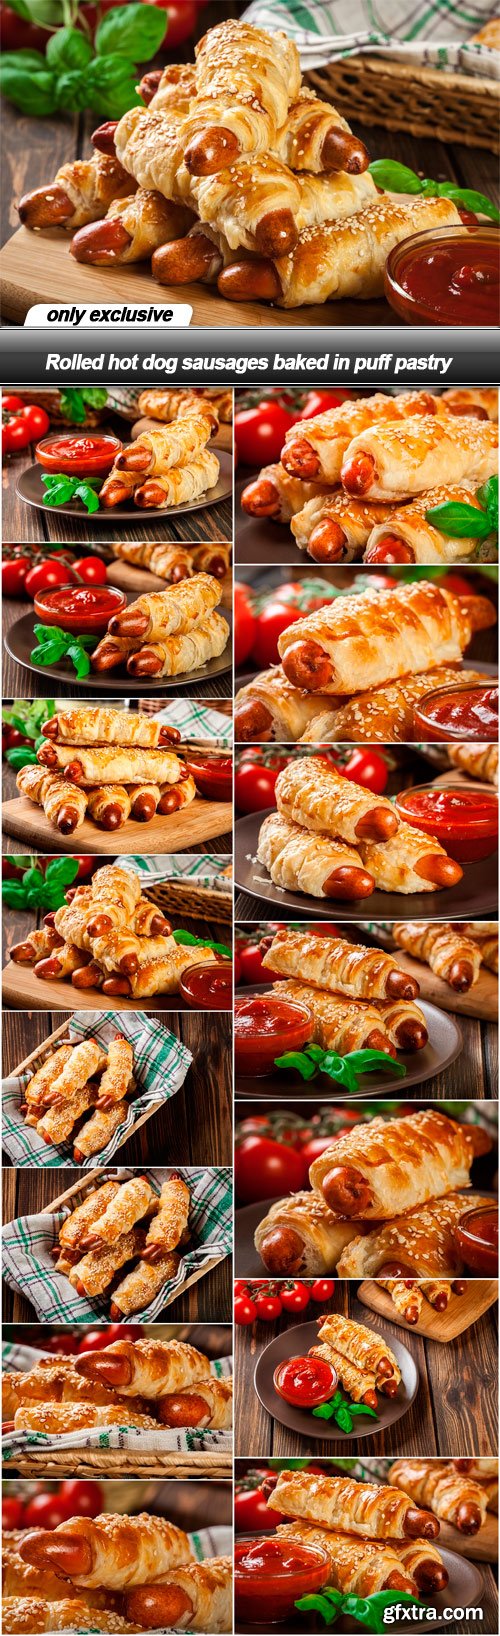 Rolled hot dog sausages baked in puff pastry - 15 UHQ JPEG